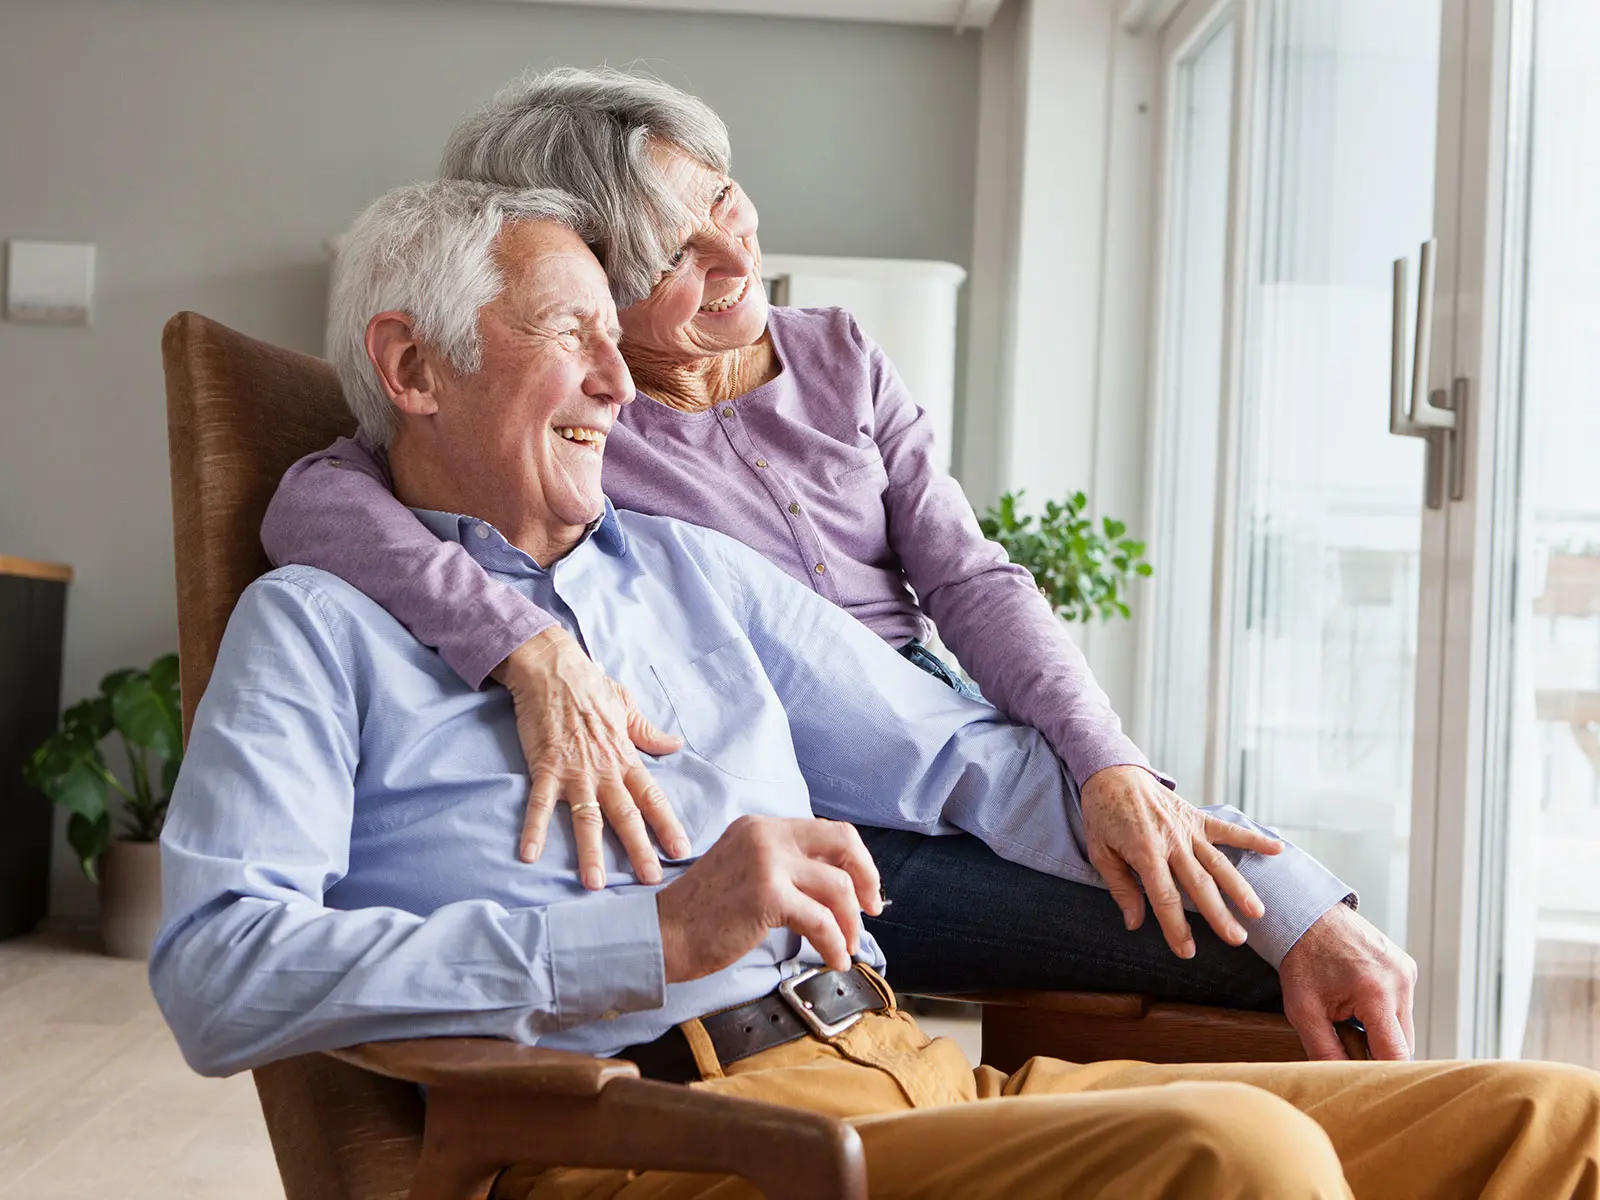 An elderly couple are sitting together on a chair. They are looking outside and seem happy.